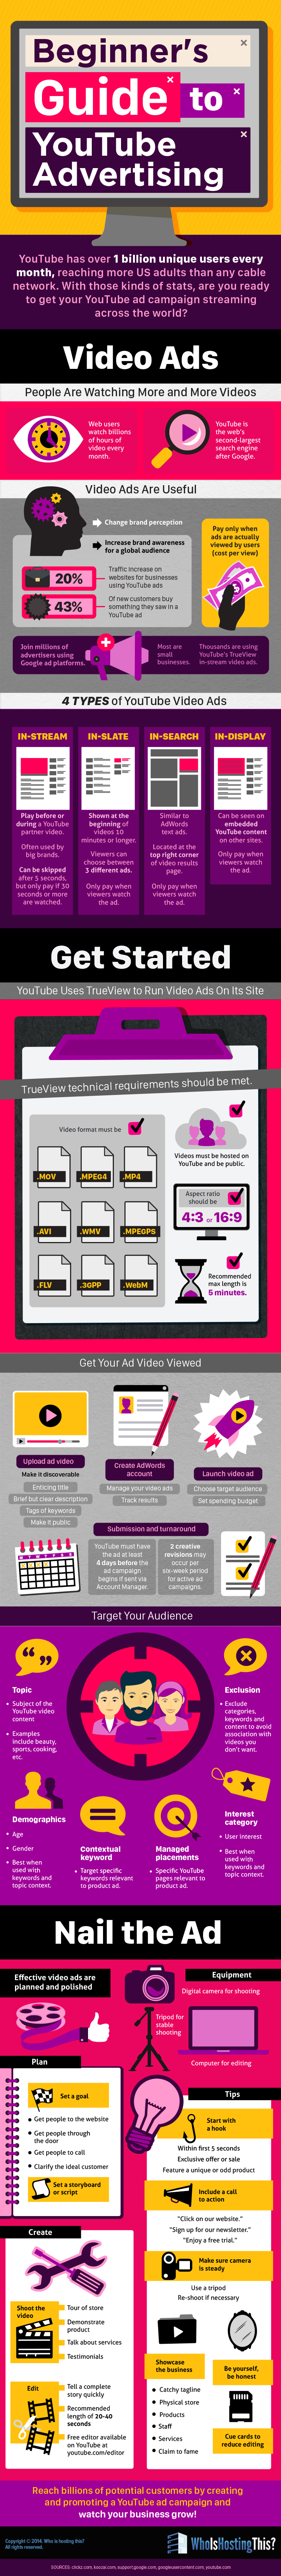 YouTube Advertising Infographic